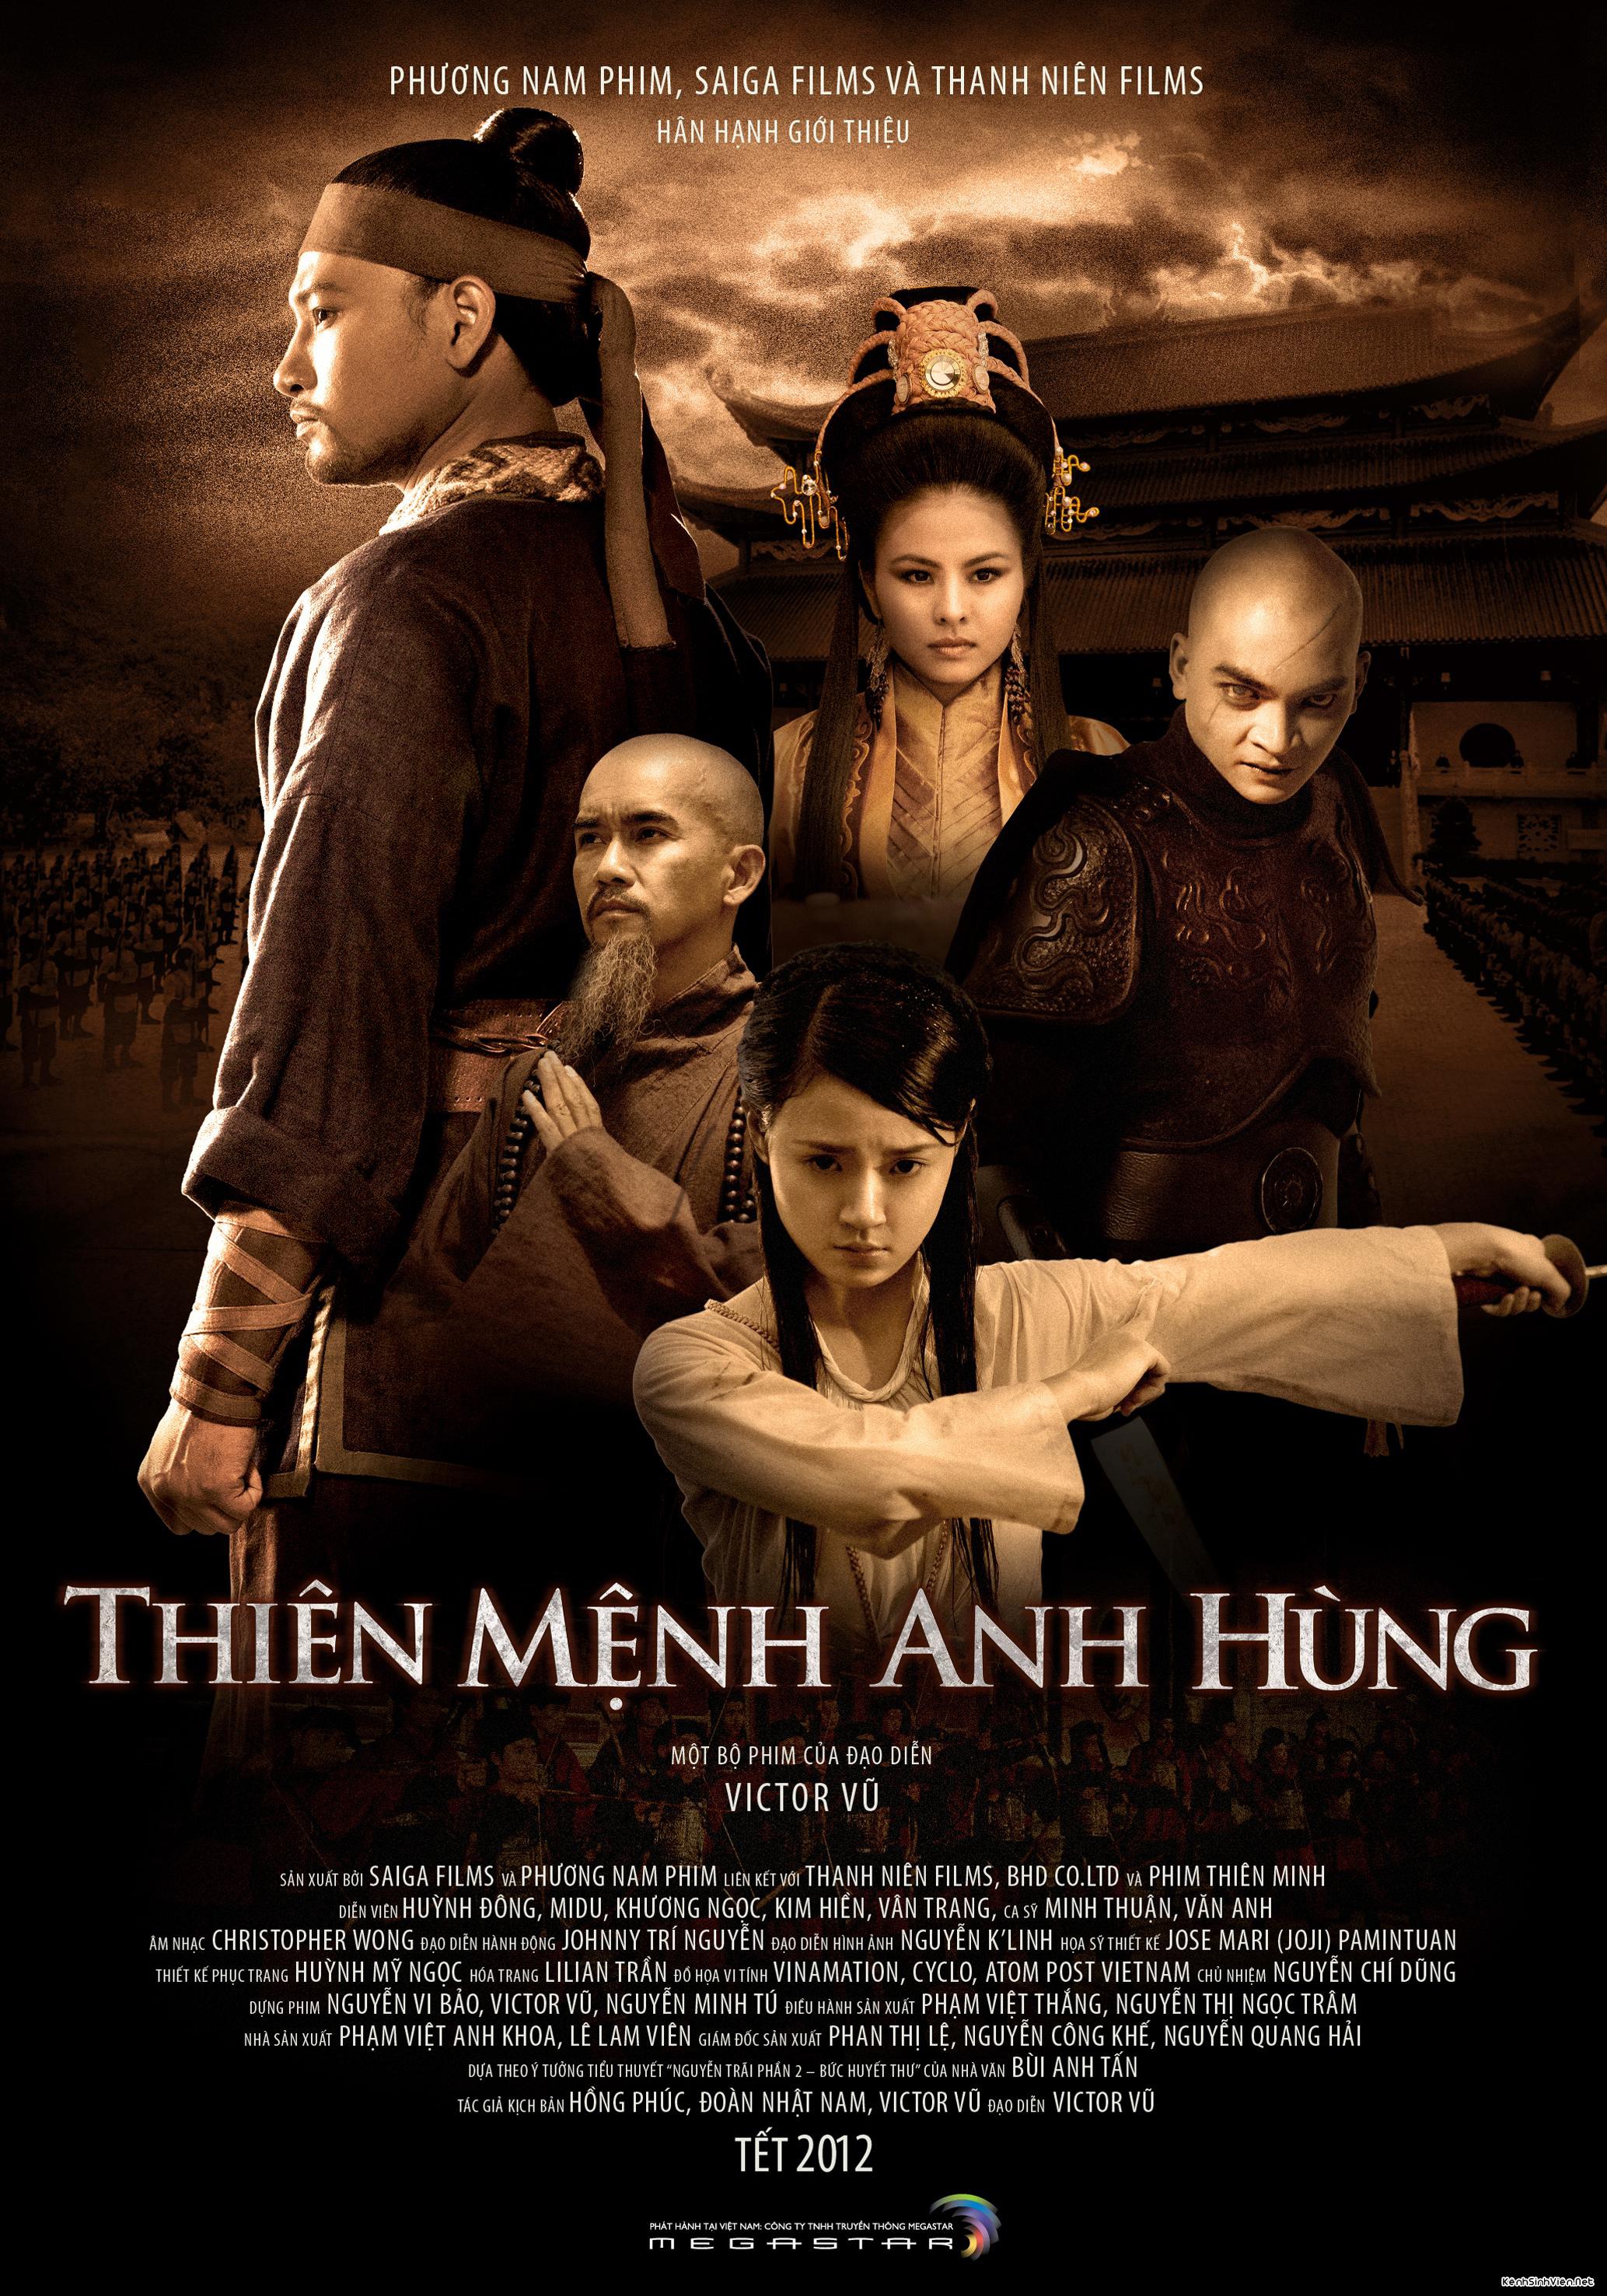 Mega Sized Movie Poster Image for Thiên menh anh hùng (#7 of 7)